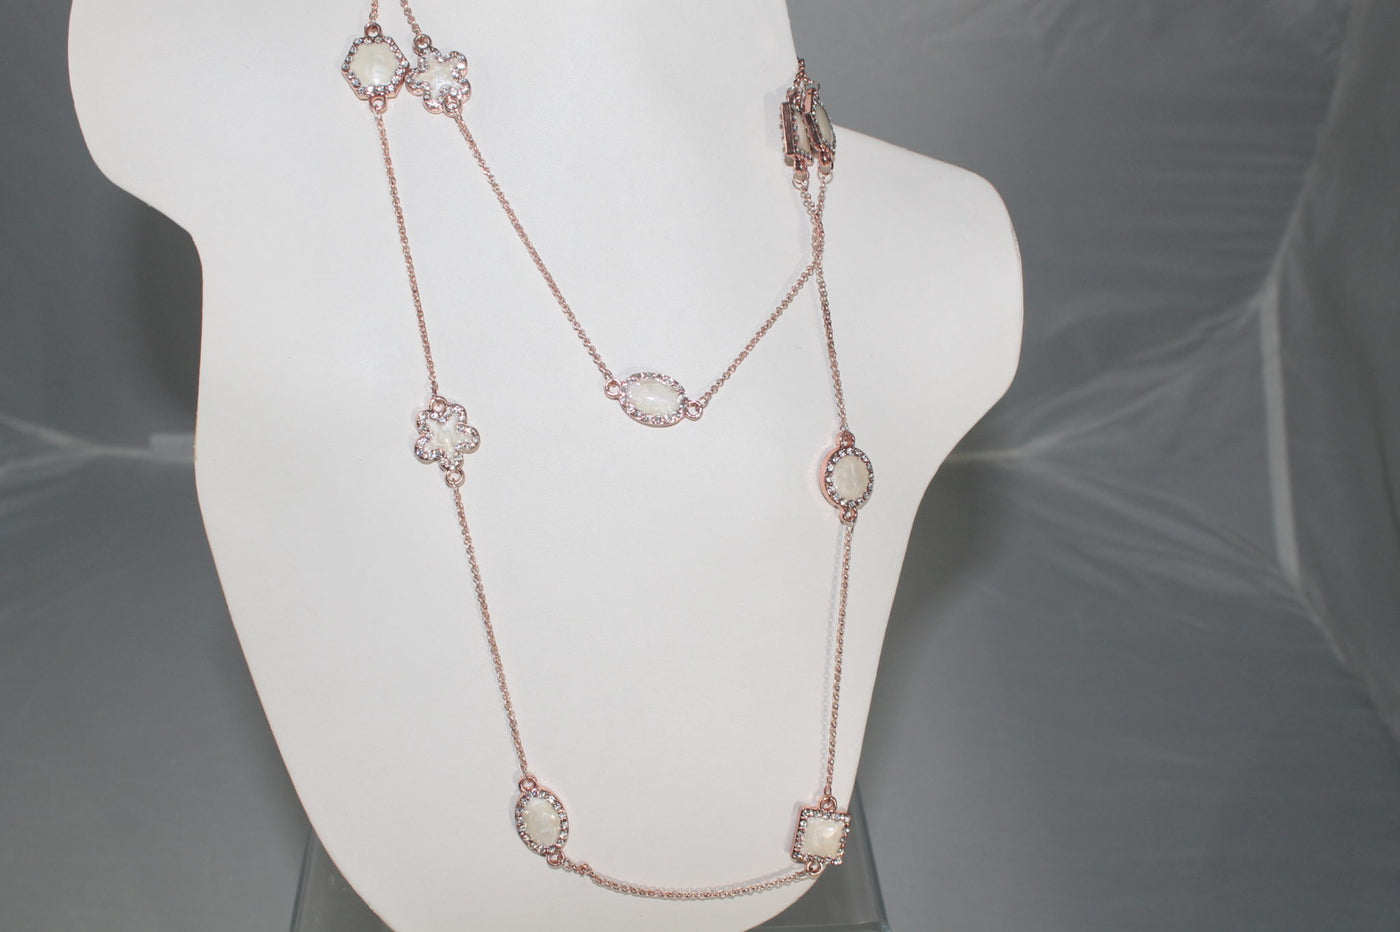 Fashion Sectional Chain Necklace with Enamel Motifs